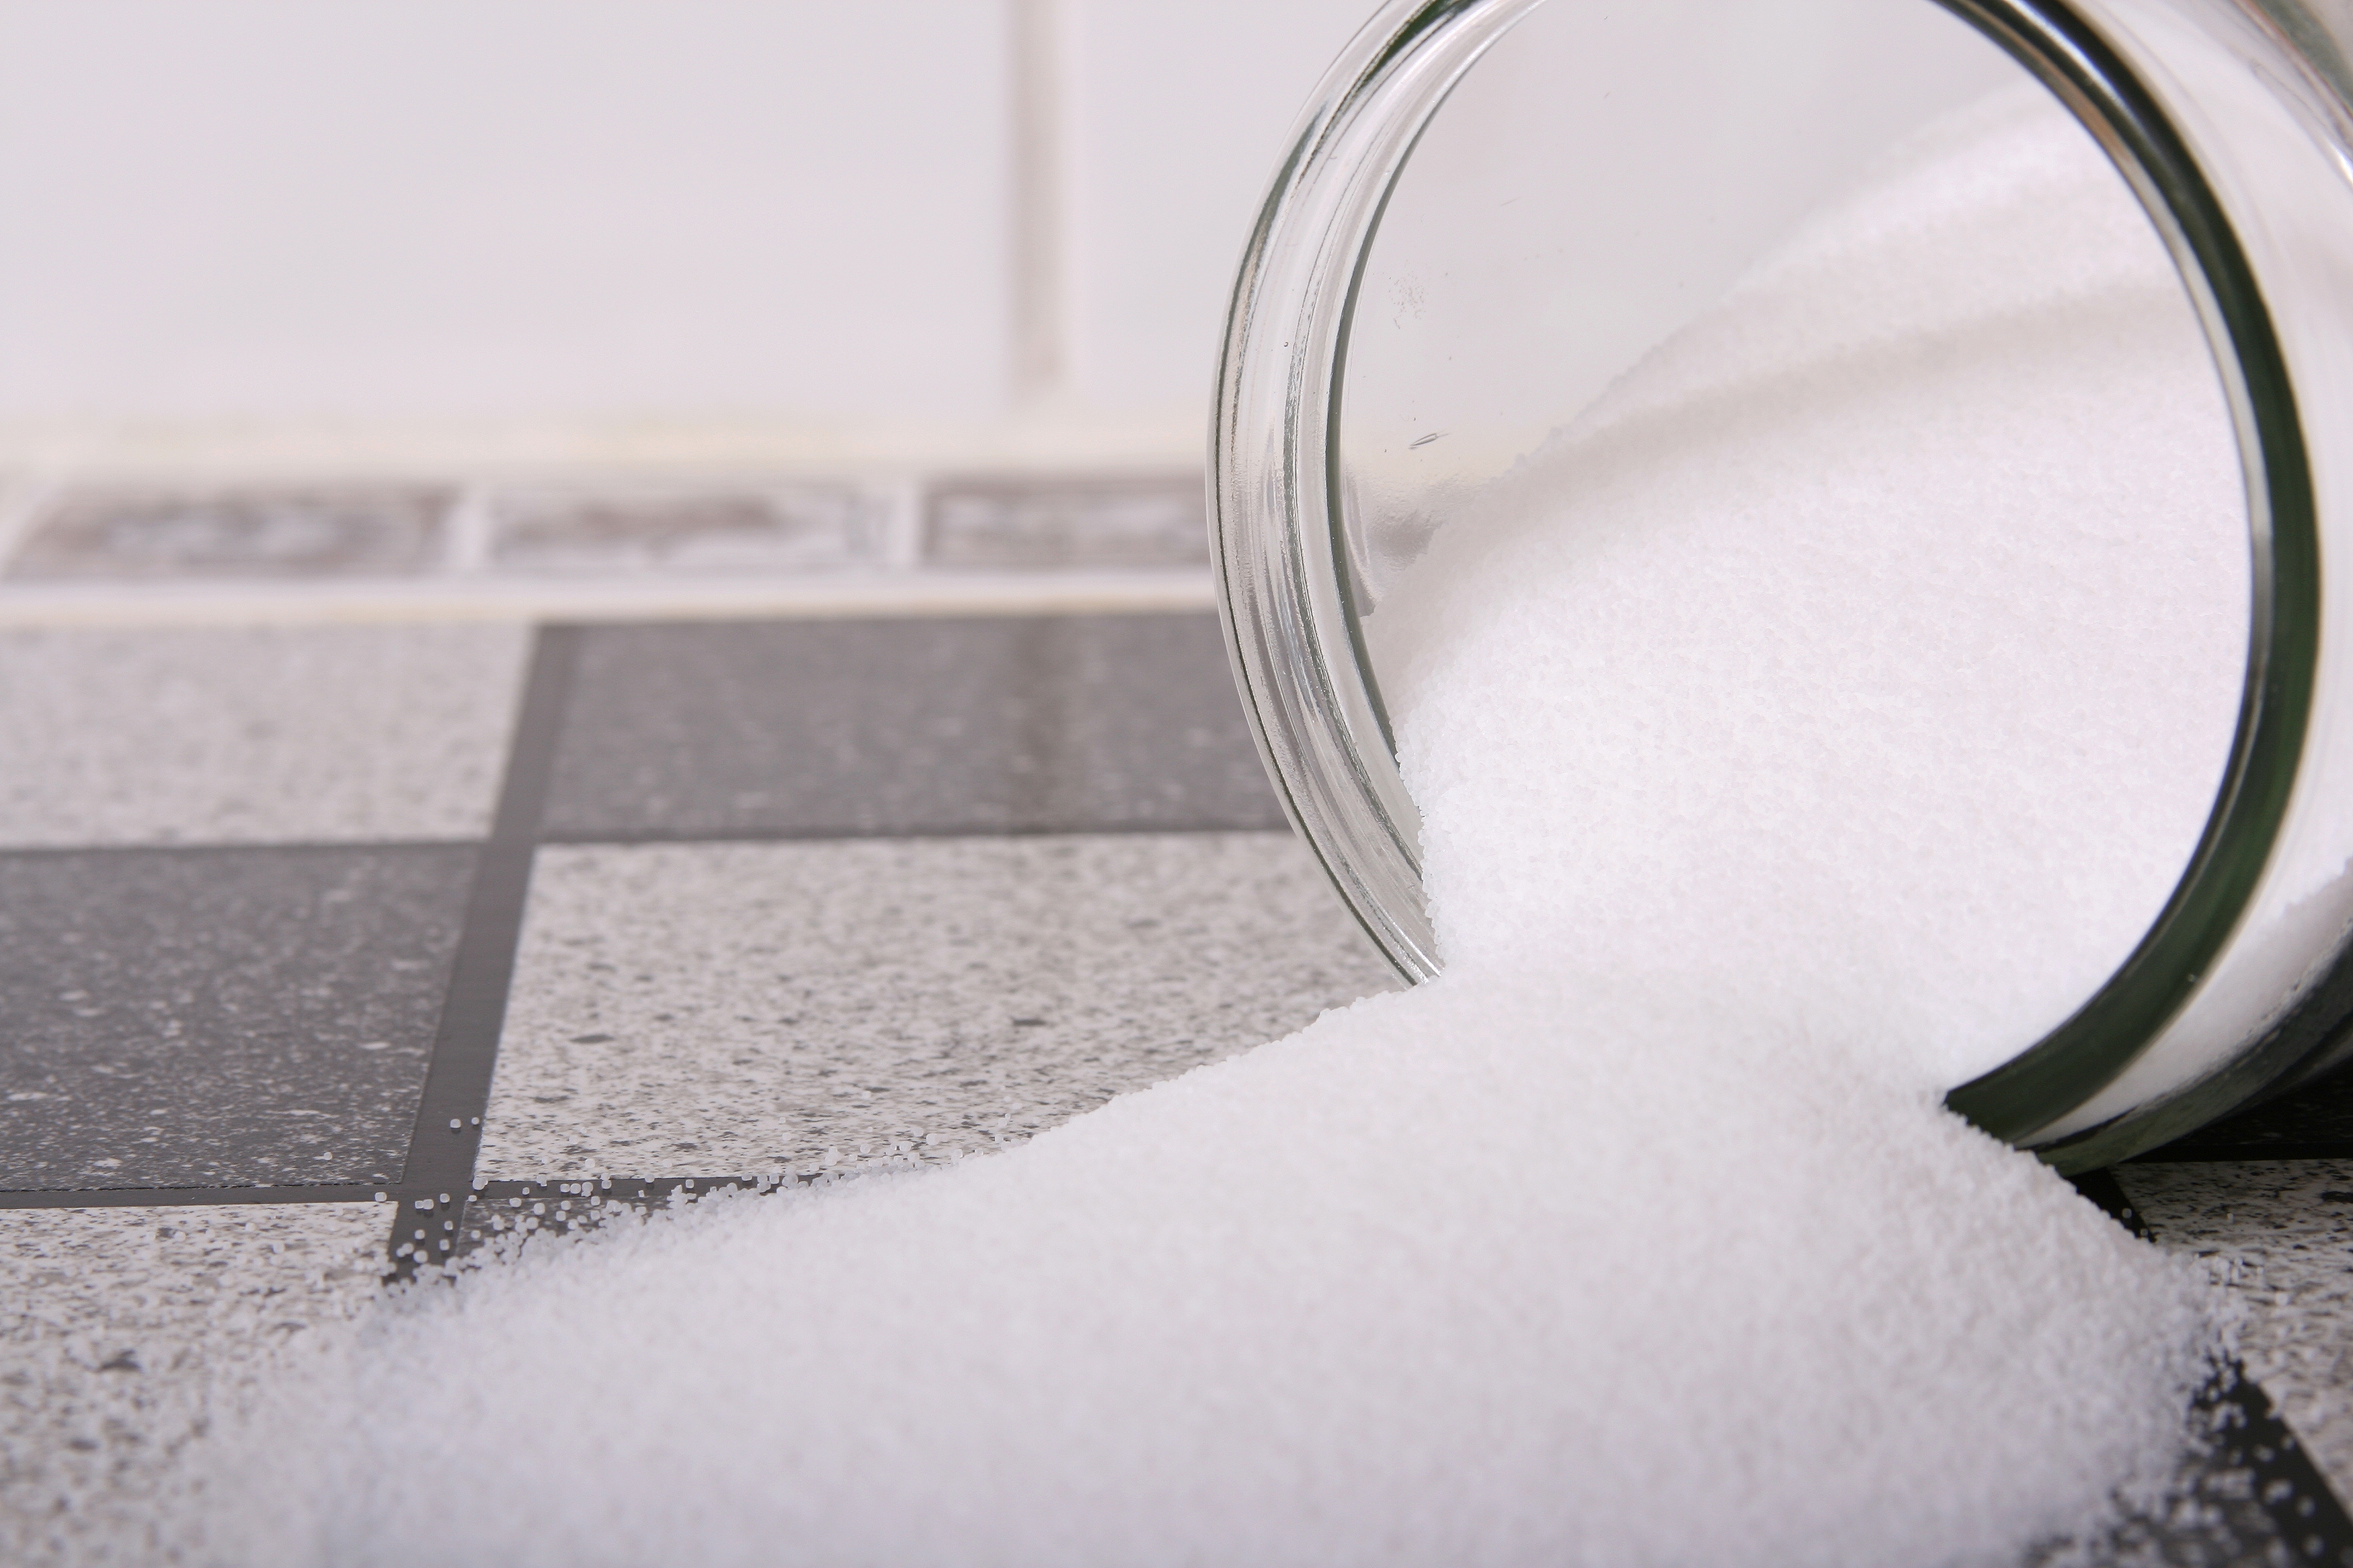 To Salt or Not to Salt? Reasonable Tips for Sodium Control